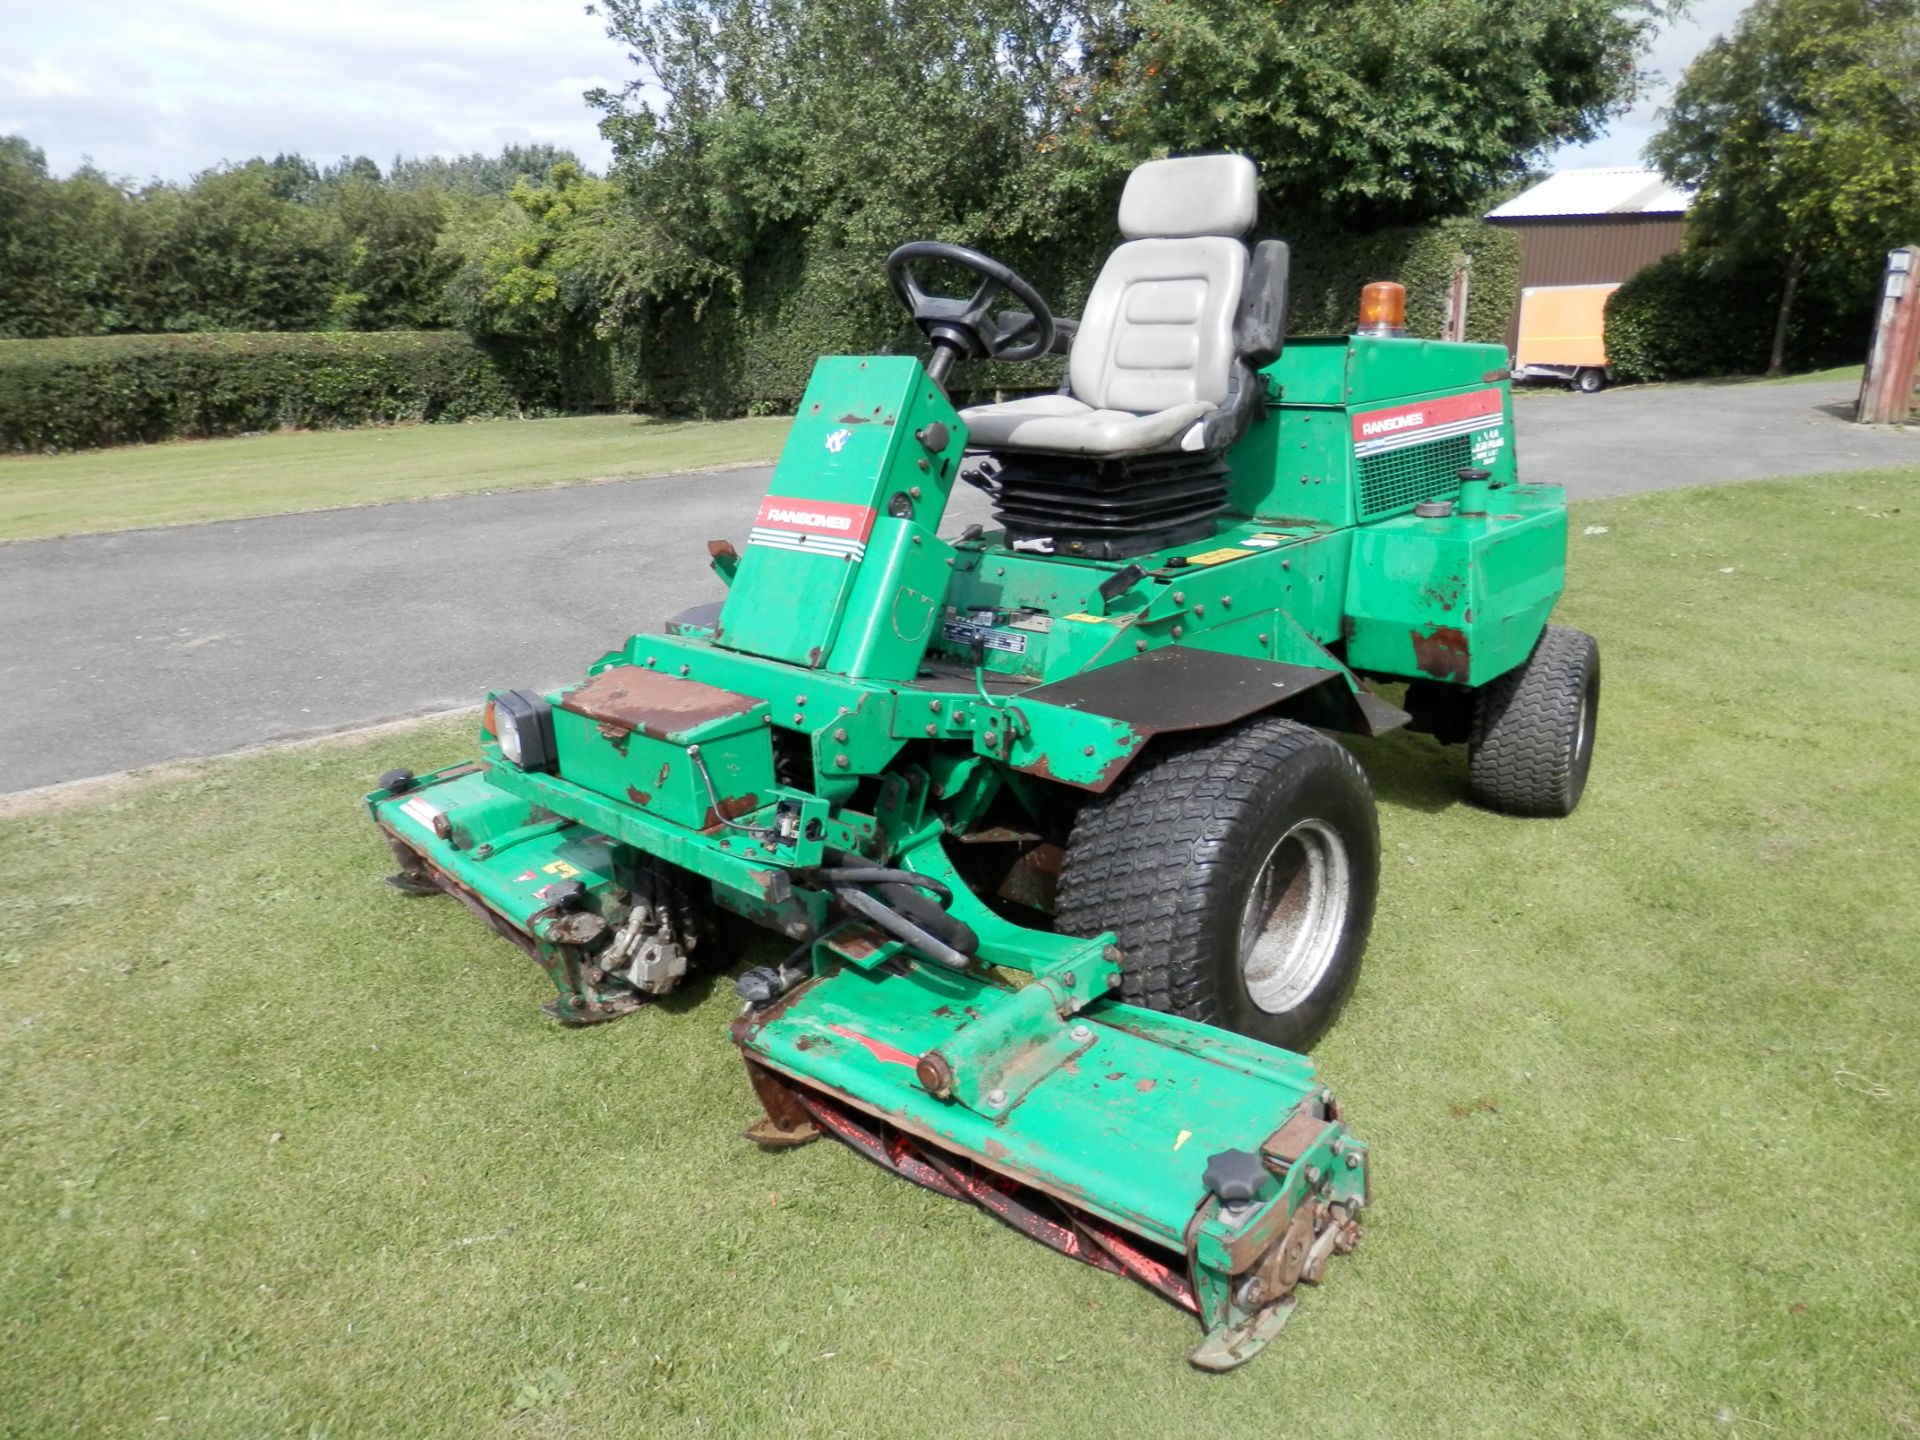 2000 MODEL REGISTERED 2001, RANSOMES PARKWAY RIDE ON 3 BLADE MOWER, WIDE CUT AREA.WORKING. NO VAT !!